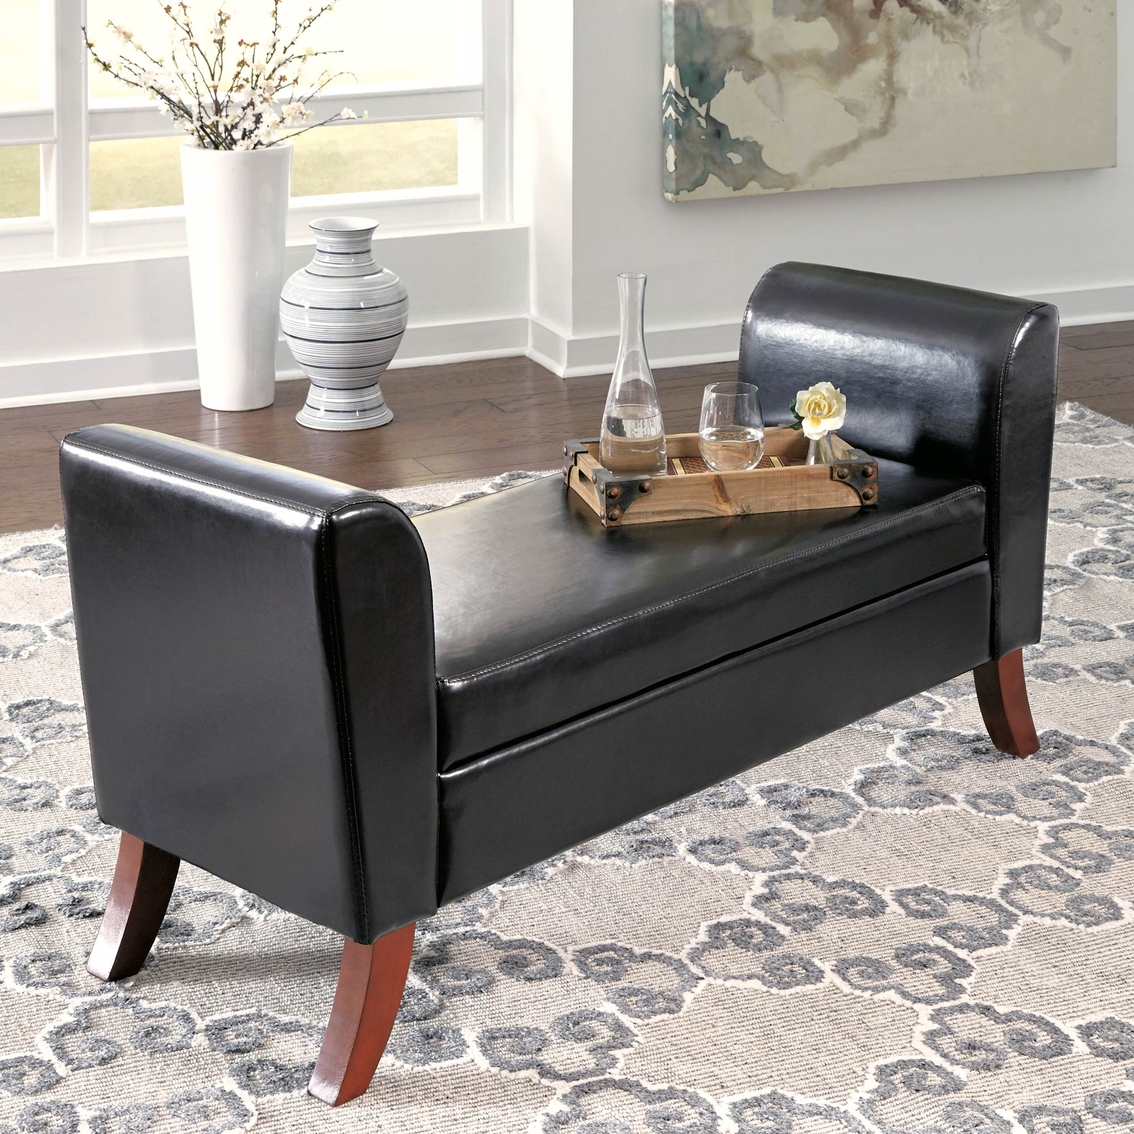 Signature Design by Ashley Upholstered Storage Bench with Curved Legs - Image 2 of 4